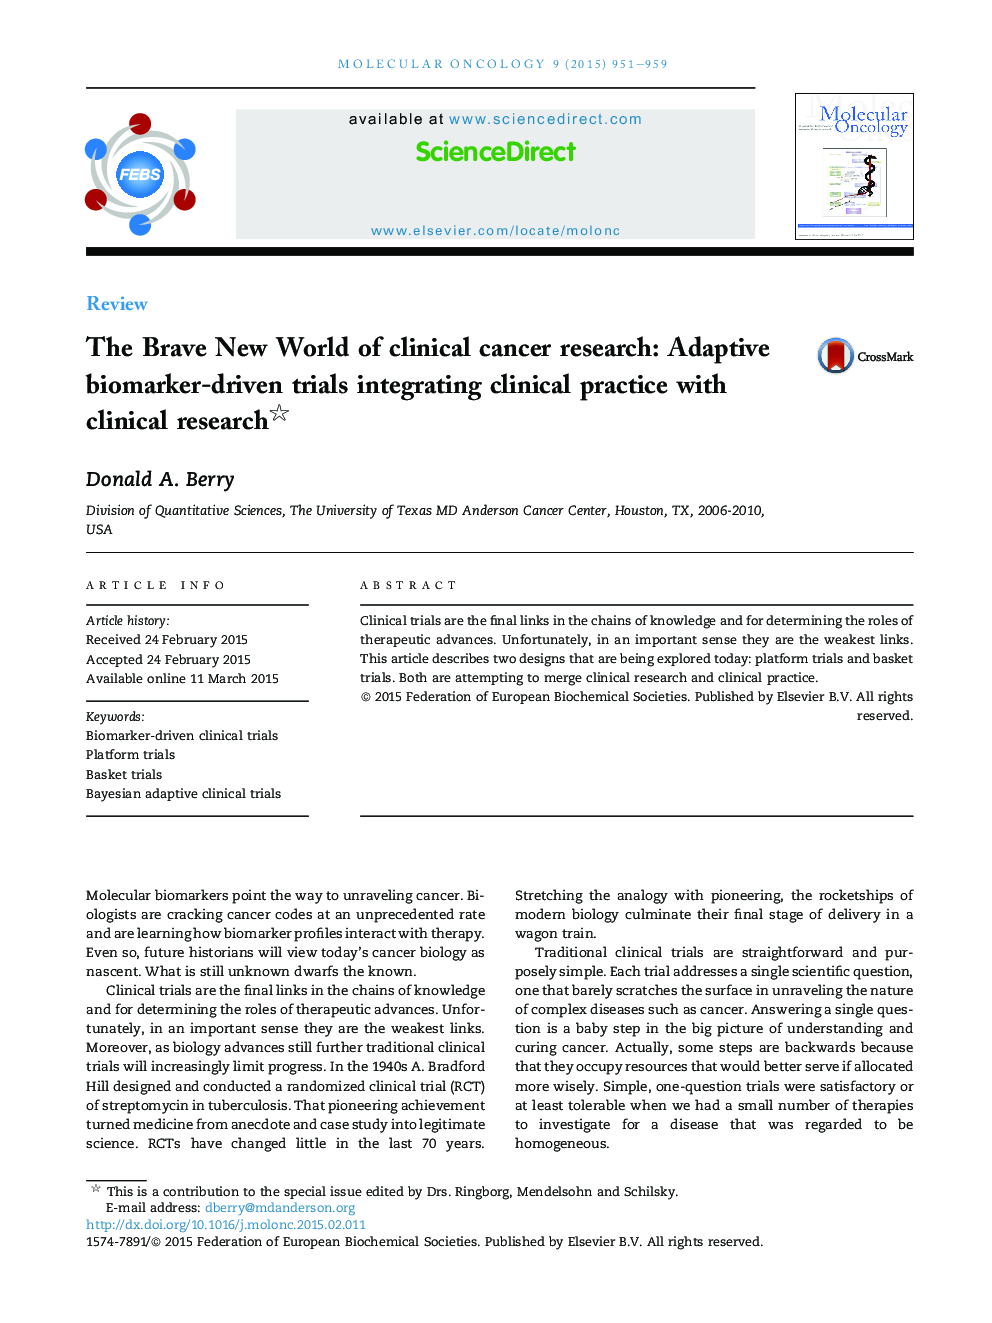 The Brave New World of clinical cancer research: Adaptive biomarker-driven trials integrating clinical practice with clinical research